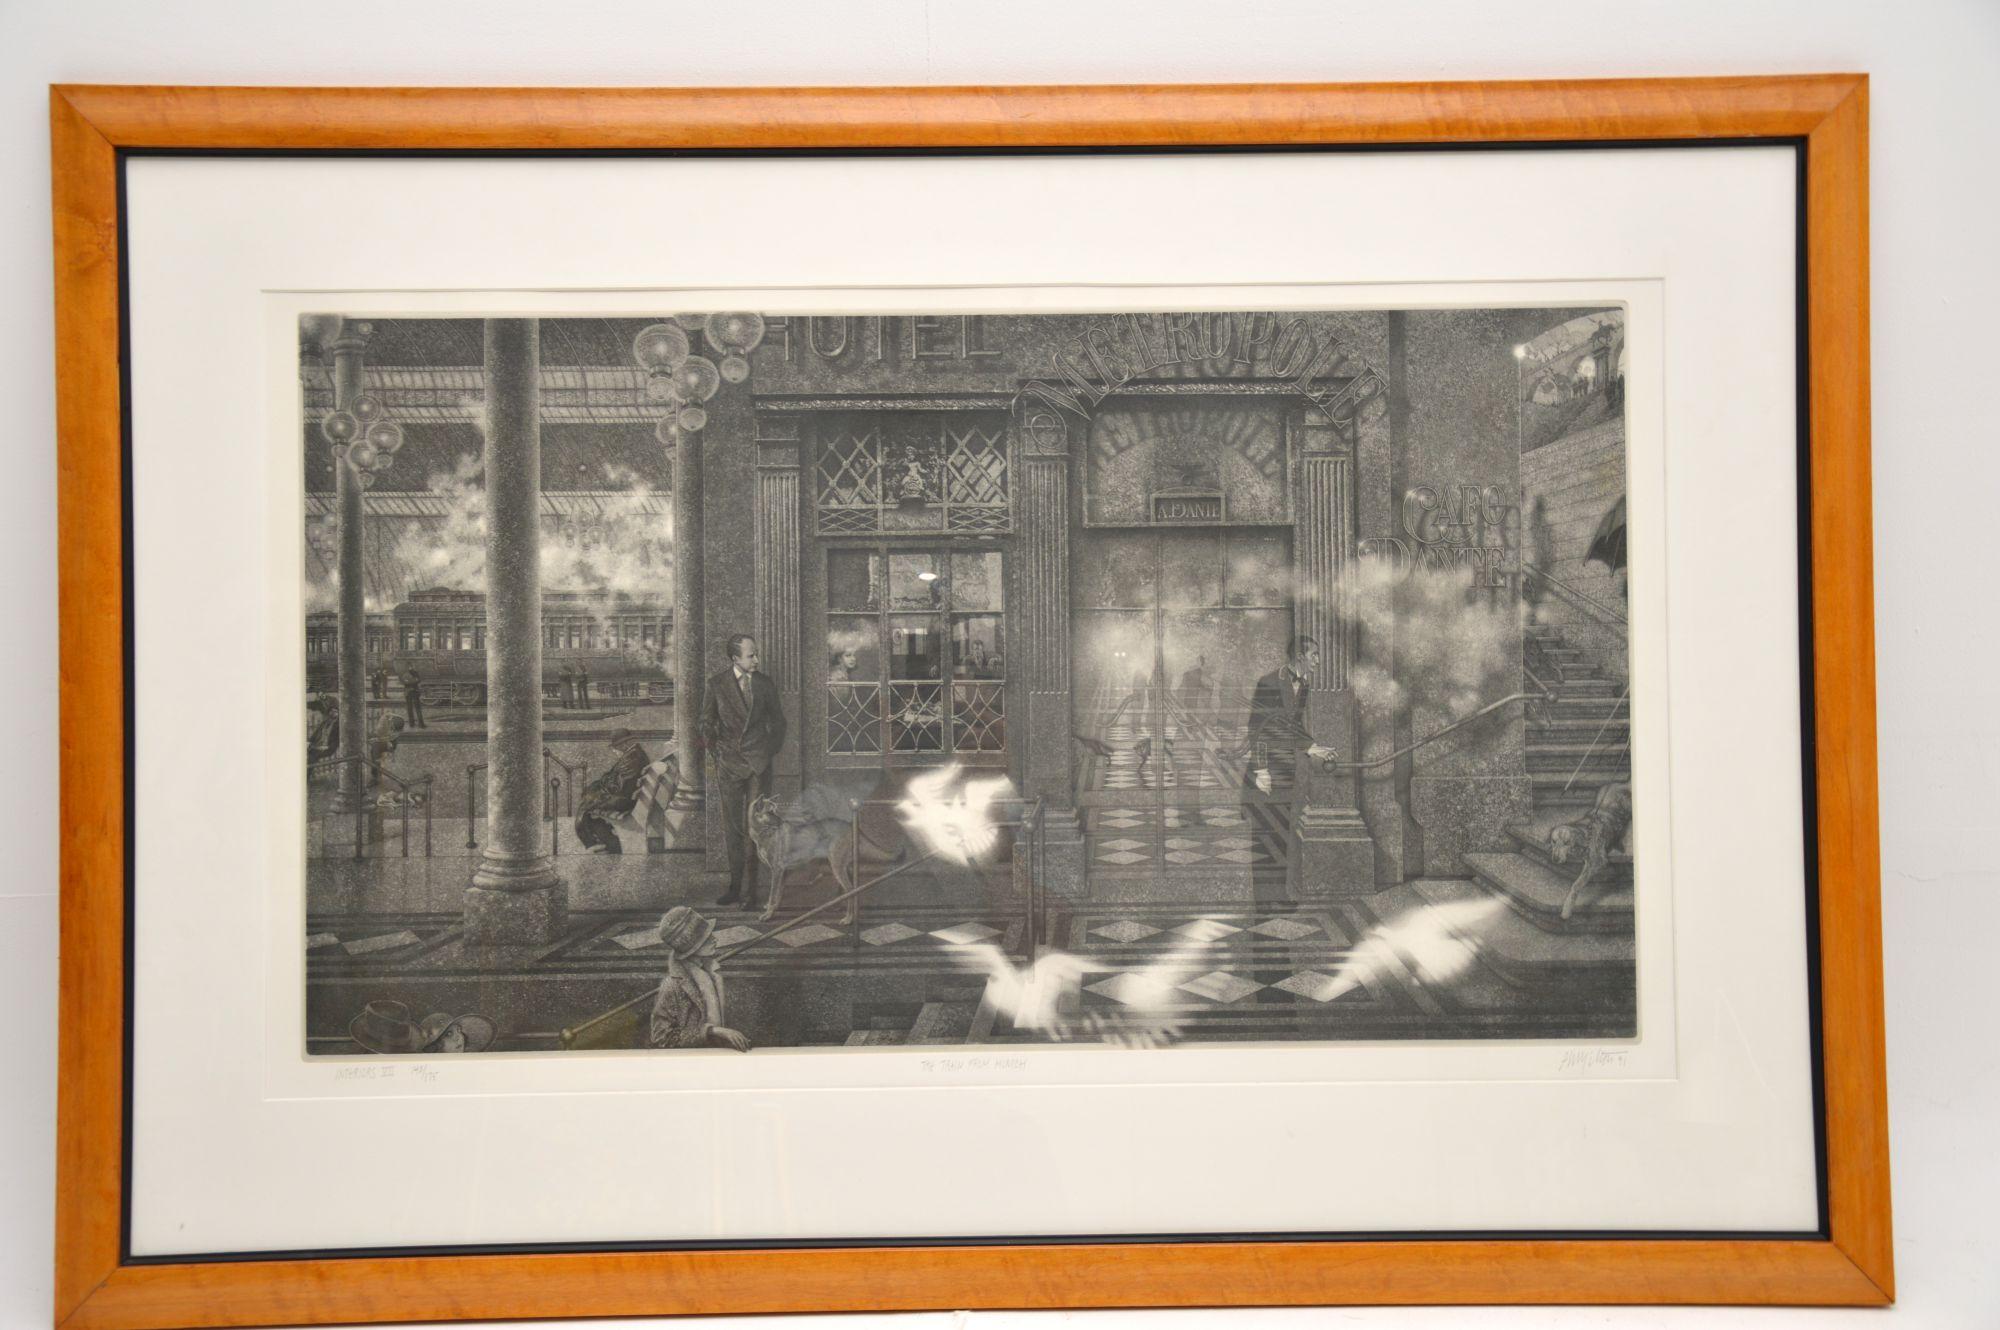 A fantastic etching by Peter Milton – Interiors VII: The Train from Munich.

This is in superb condition and is beautifully framed. Signed, dated and titled by the artist, numbered 142 / 175. It is dated 1991.

There is just some minor surface wear